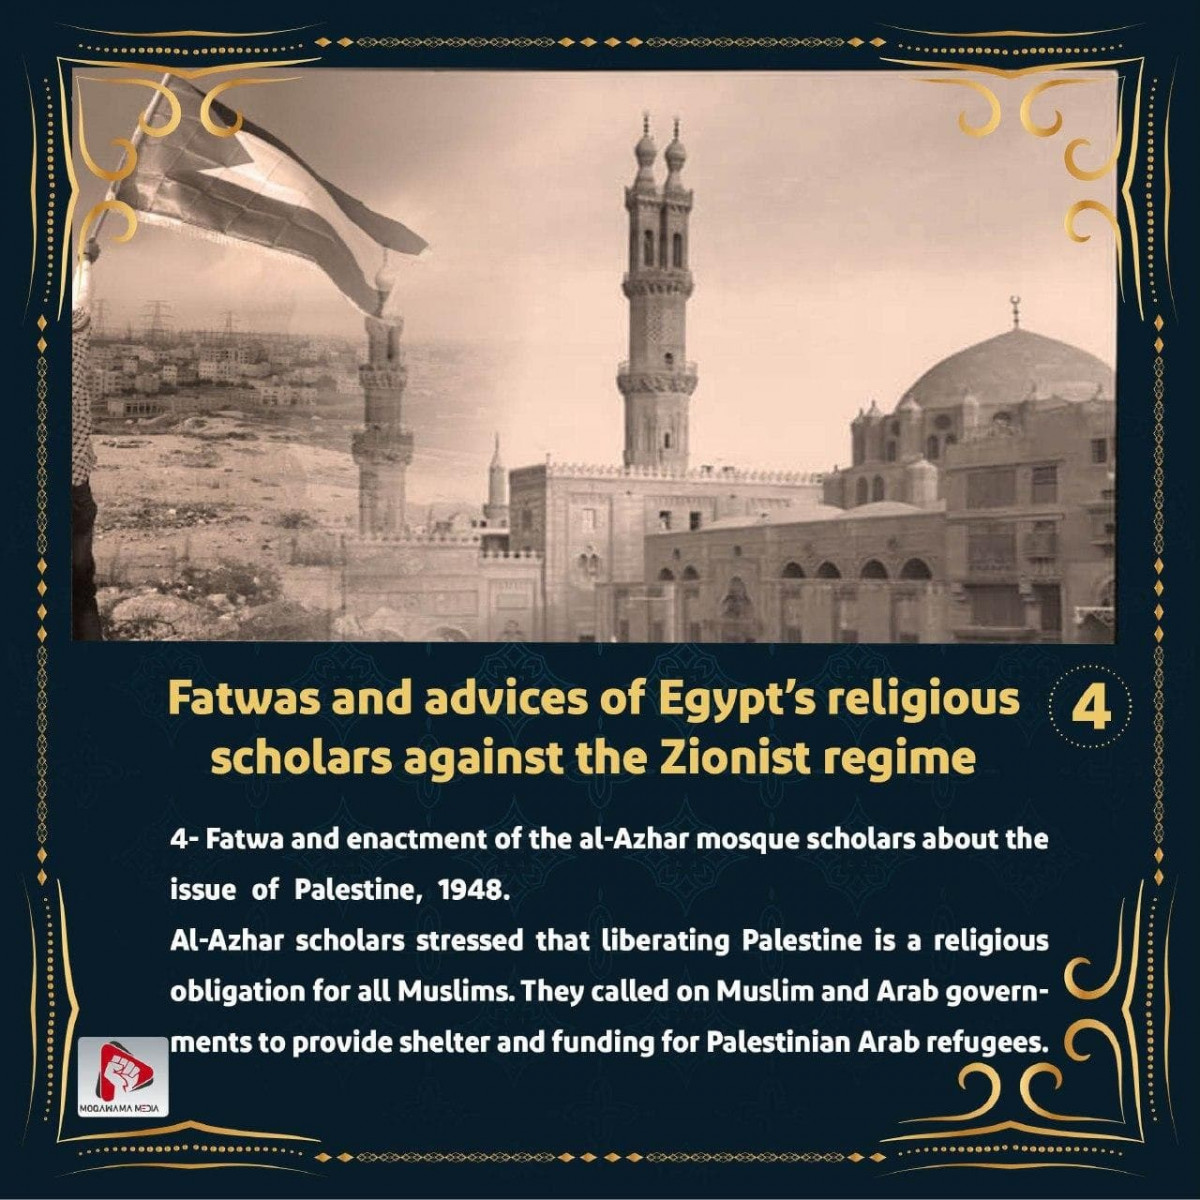 Fatwas and advices of Egypt's religious scholars against the Zionist regime 4